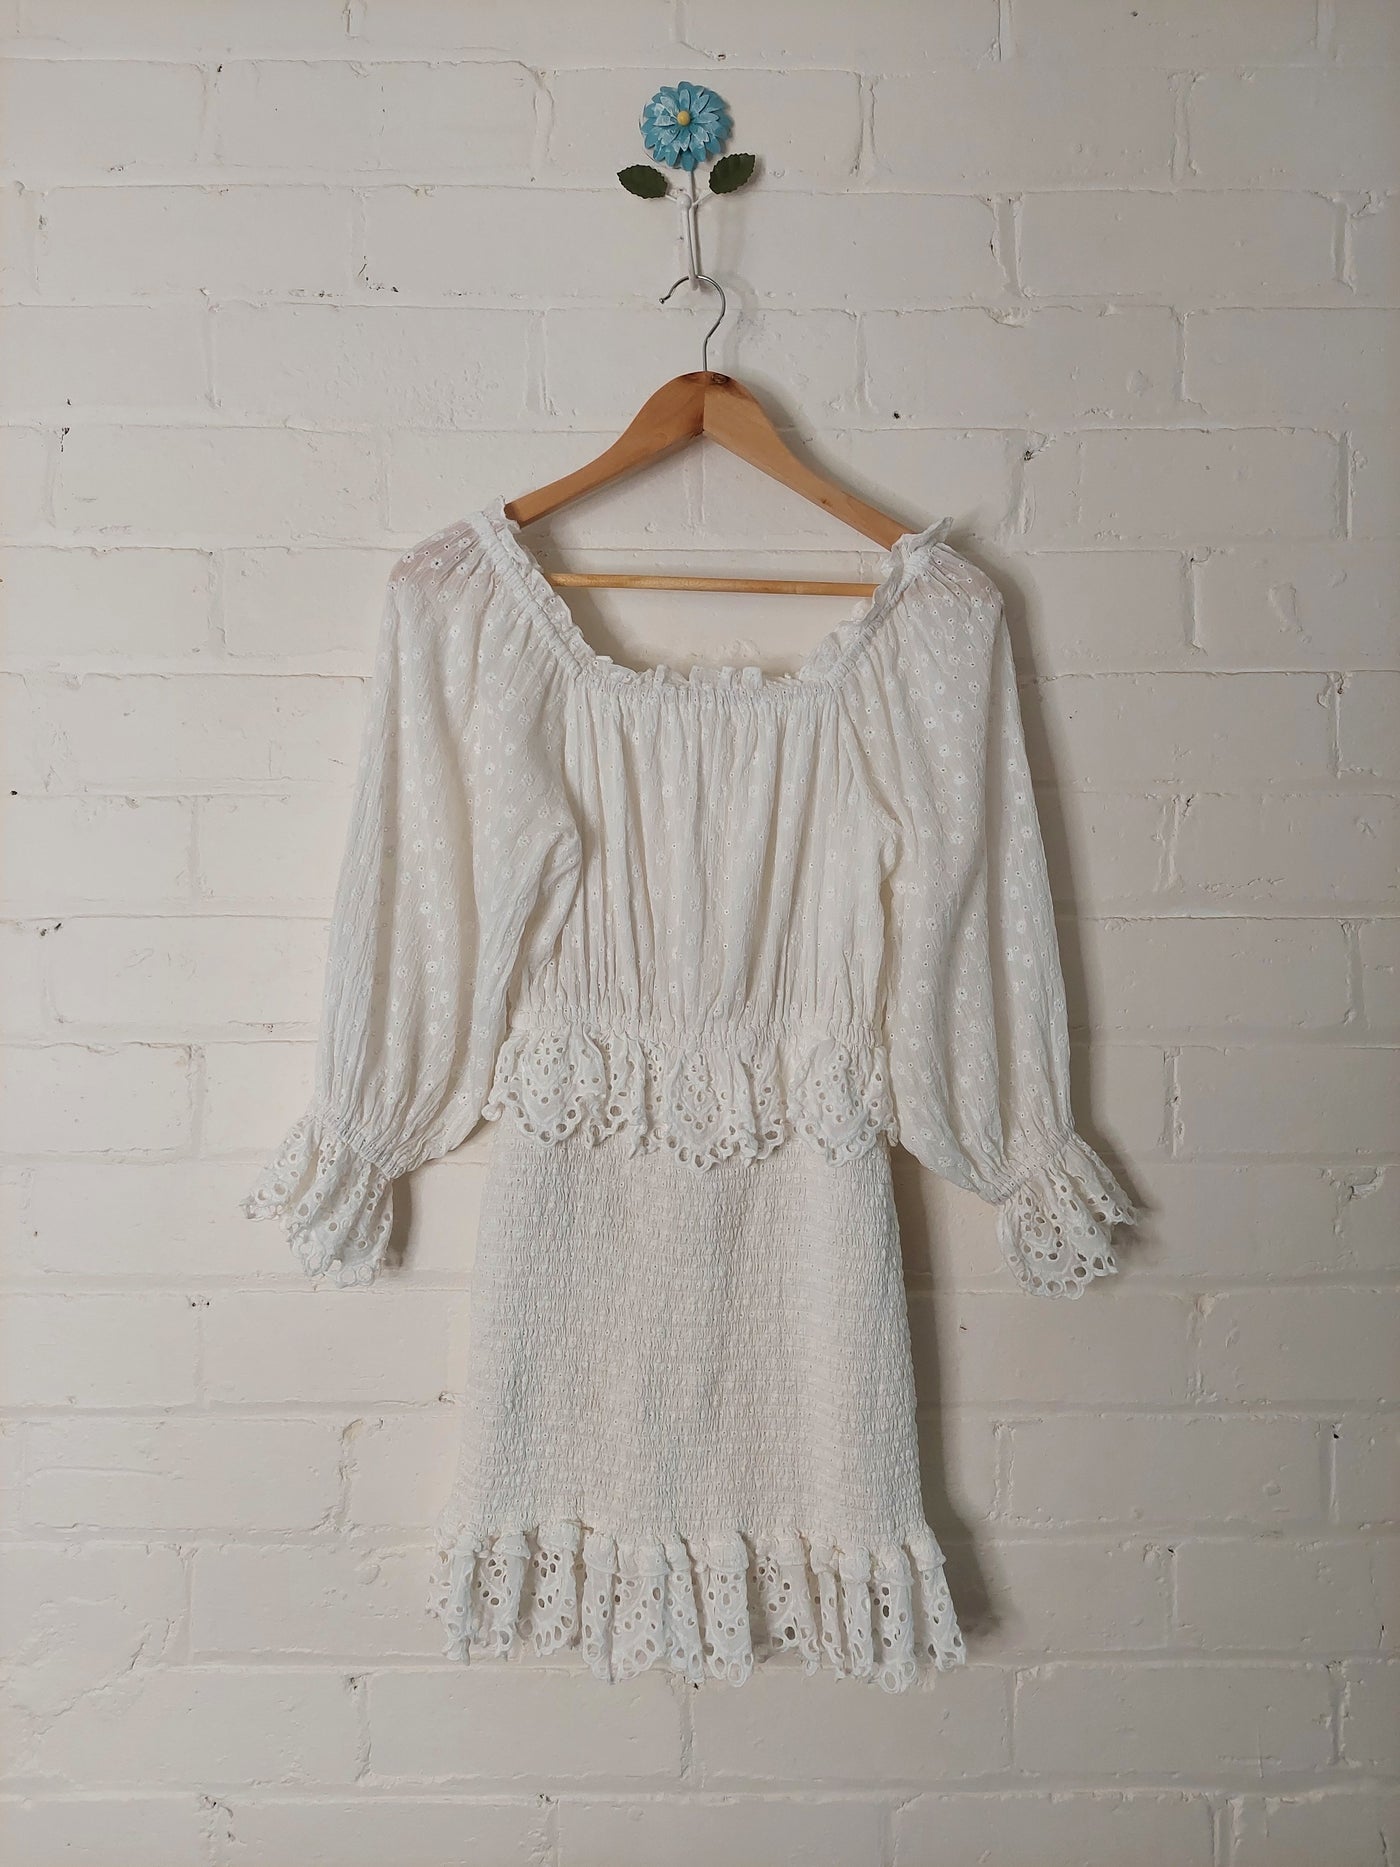 Spell & the Gypsy Collective Daisy Chain Ruched Mini Dress - White, Size S (AU 8 / US 4)